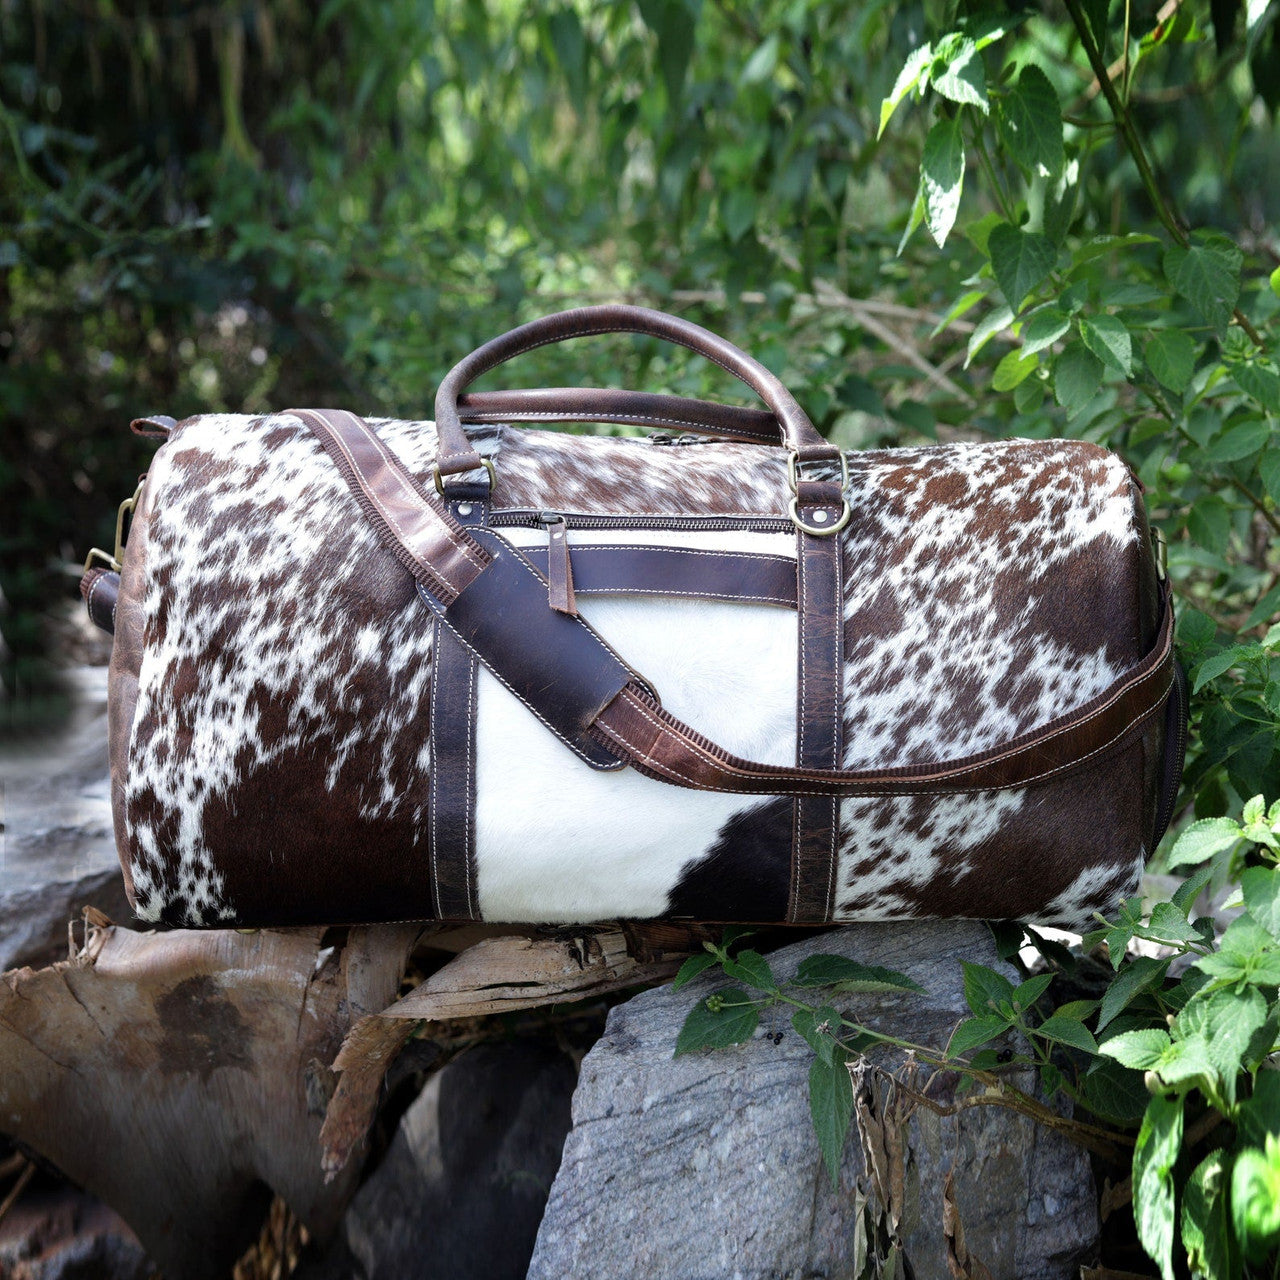 Explore in style with our tricolor cowhide travel bag—versatile, durable, and perfect for long journeys, gym sessions, and more